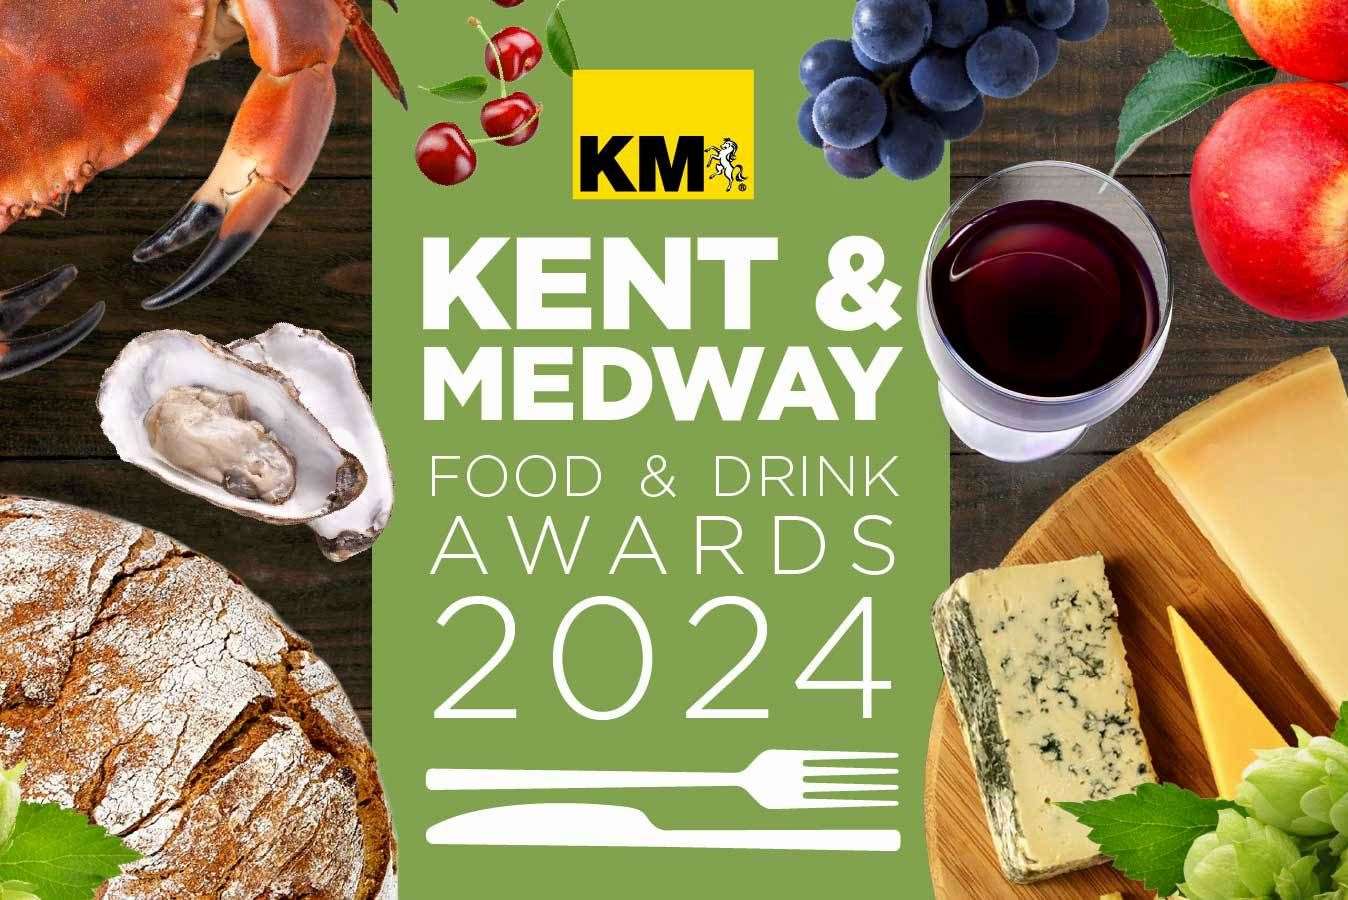 It’s time to reveal who you nominated for the first Kent & Medway Food & Drink Awards